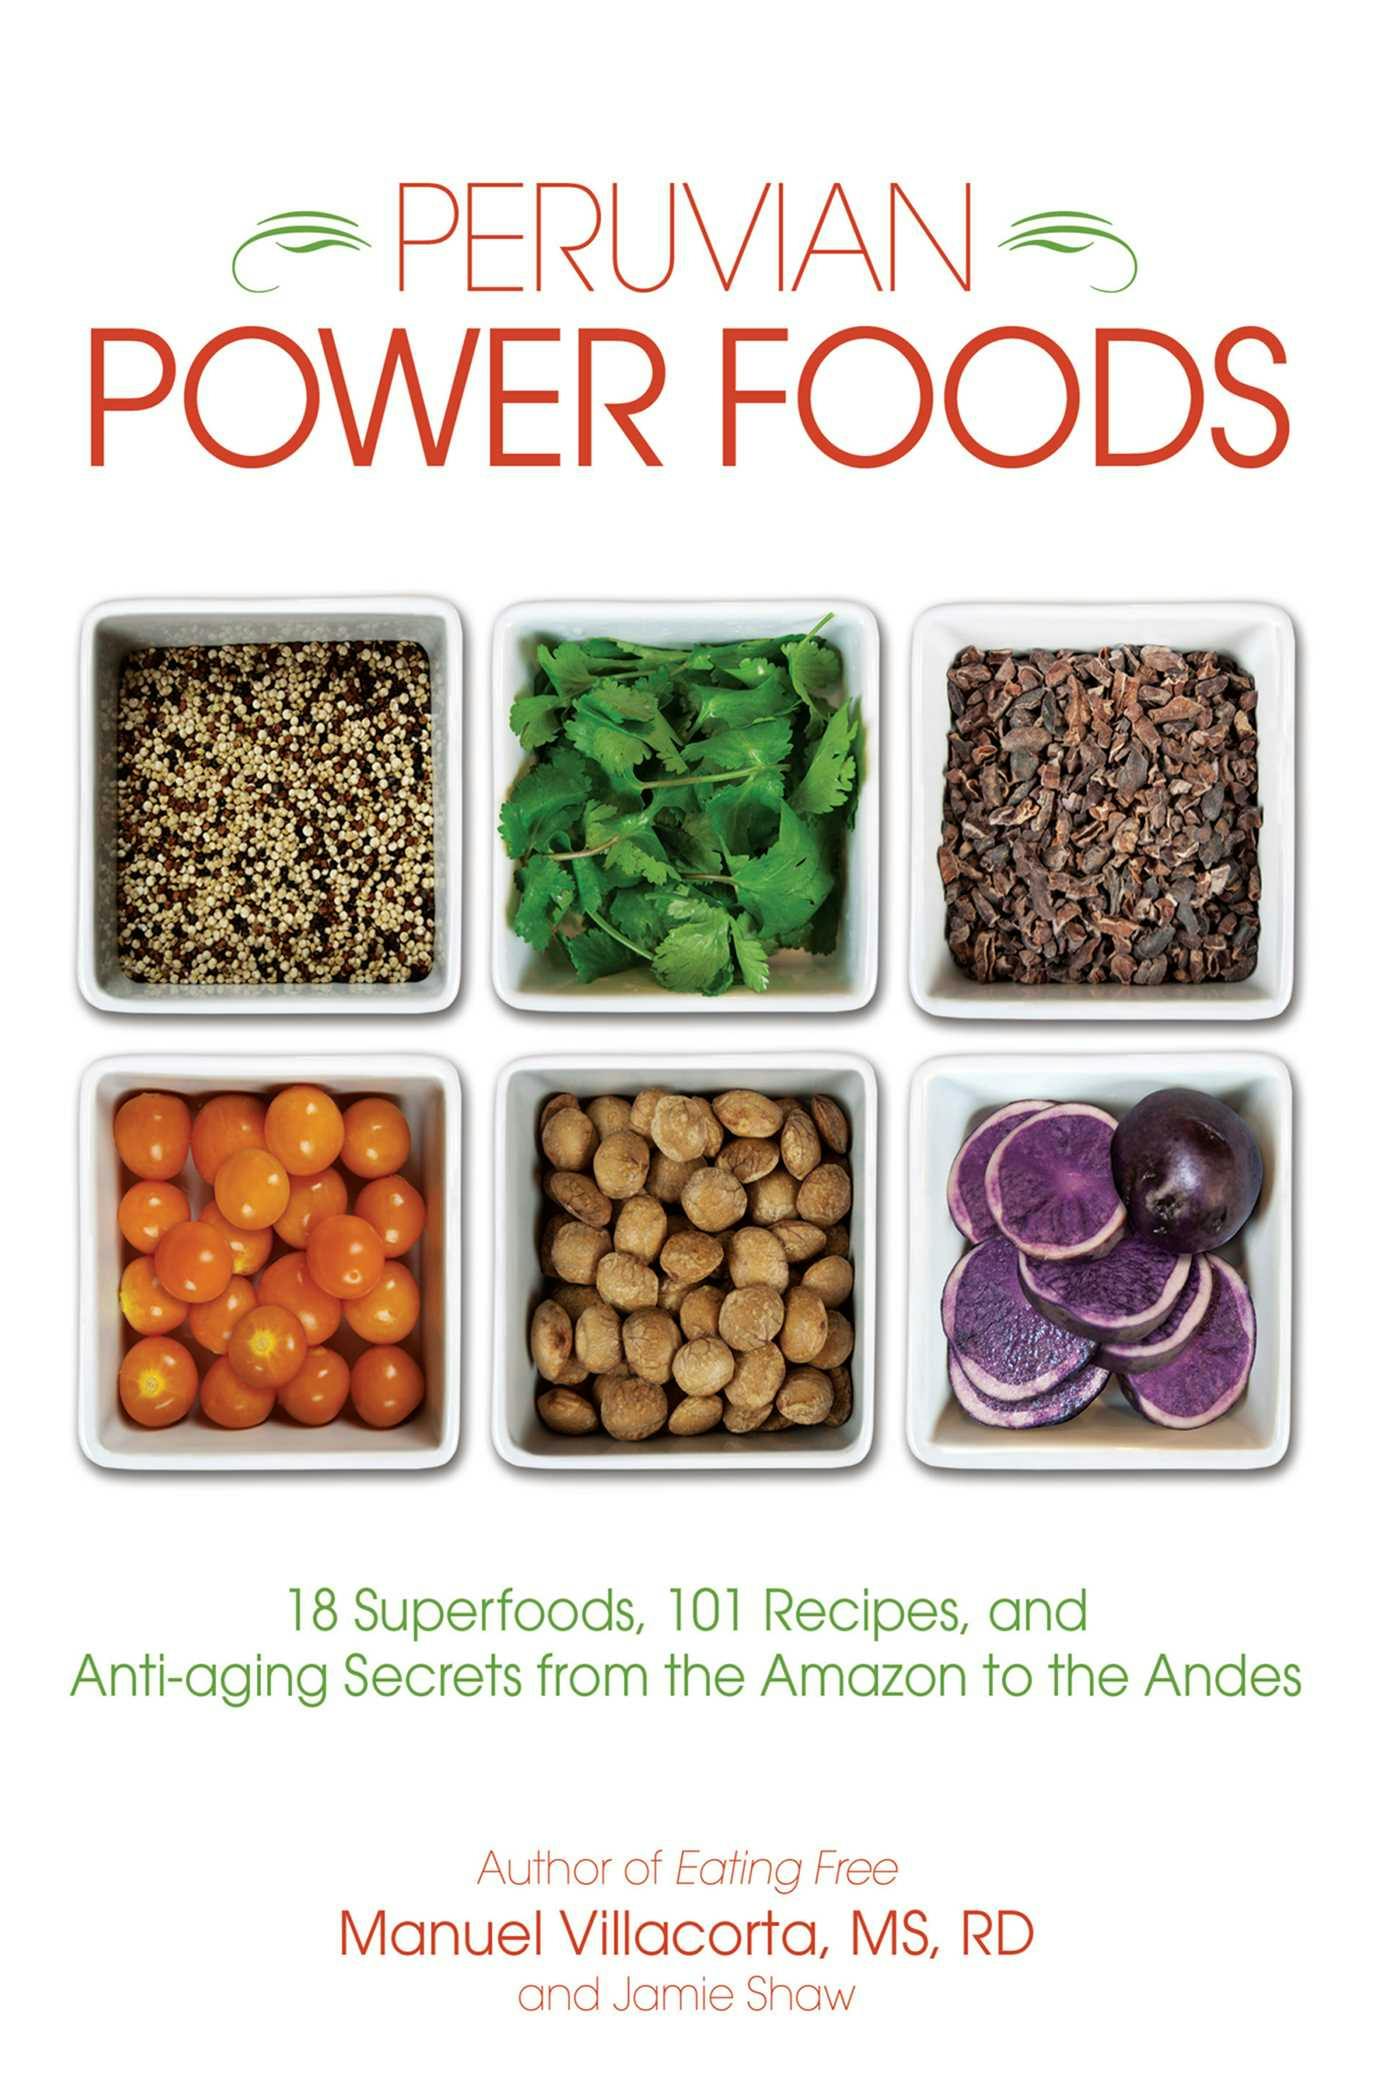 Peruvian Power Foods: 18 Superfoods, 101 Recipes, and Anti-aging Secrets from the Amazon to the Andes - undefined